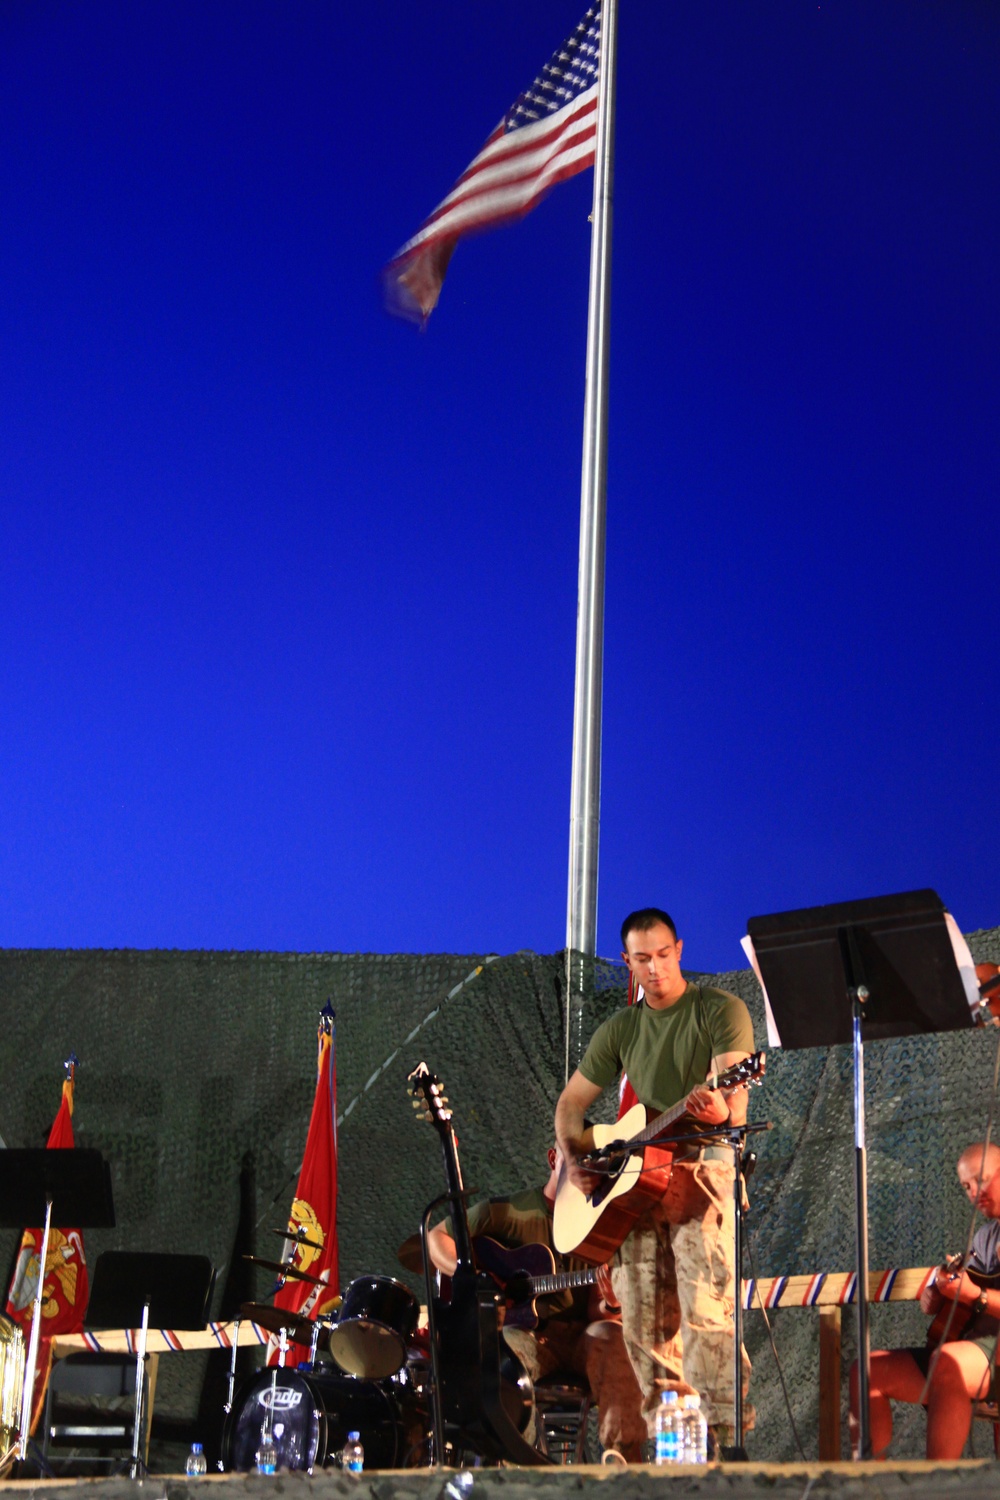 Marine puts Hollywood music career on hold to serve in Afghanistan